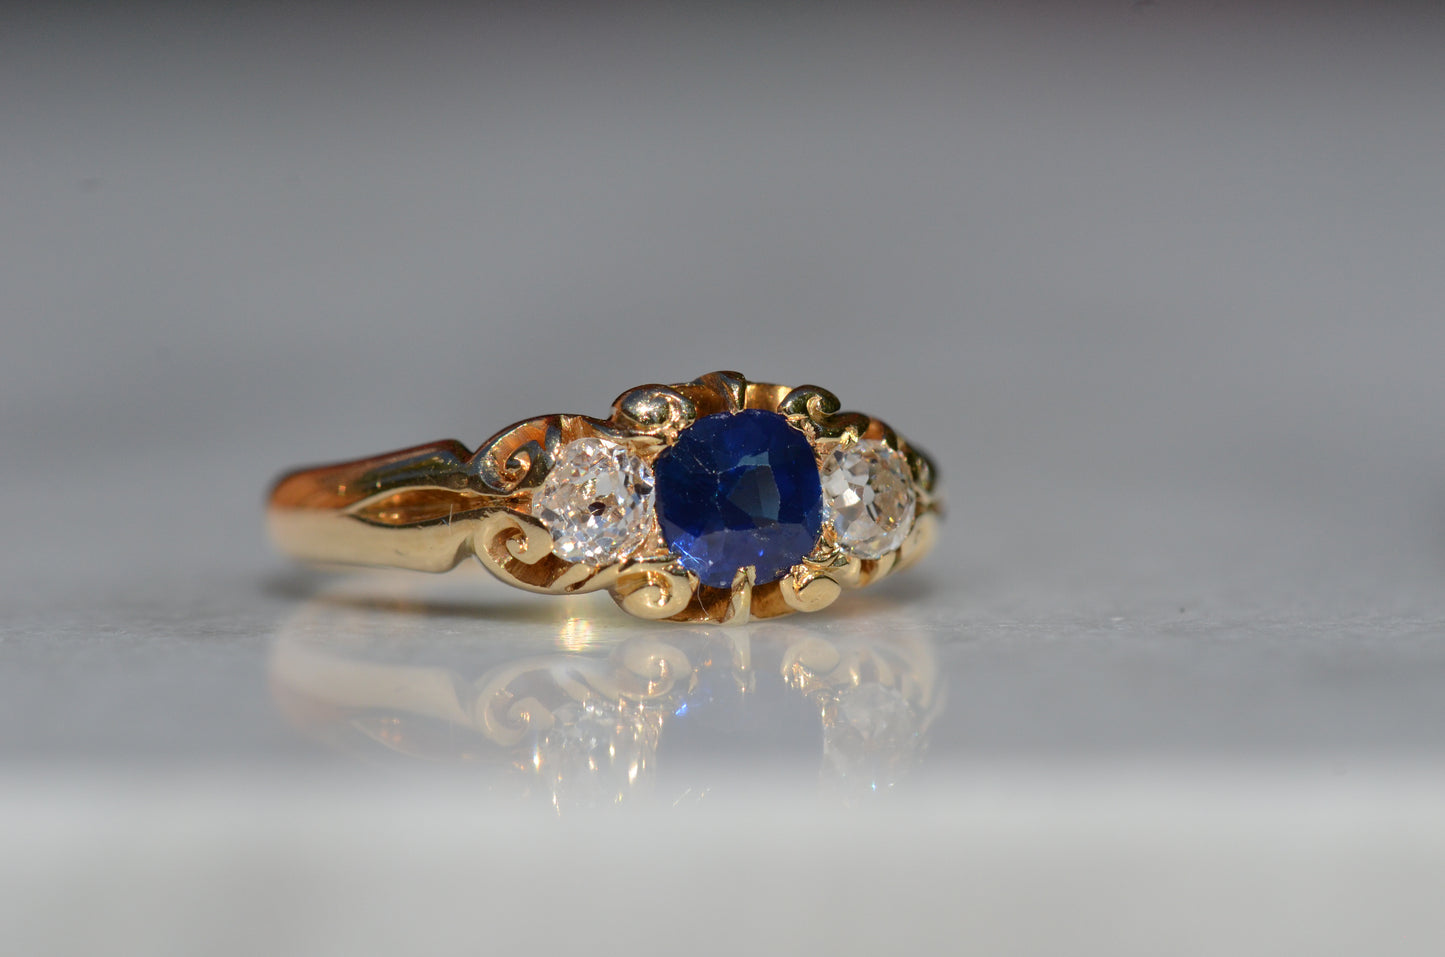 A Victorian ring in yellow gold with swirling shoulders and a central vivid blue sapphire flanked by a pair of old mine cut diamonds, photographed slightly to the right to focus on the details of the diamond facets.